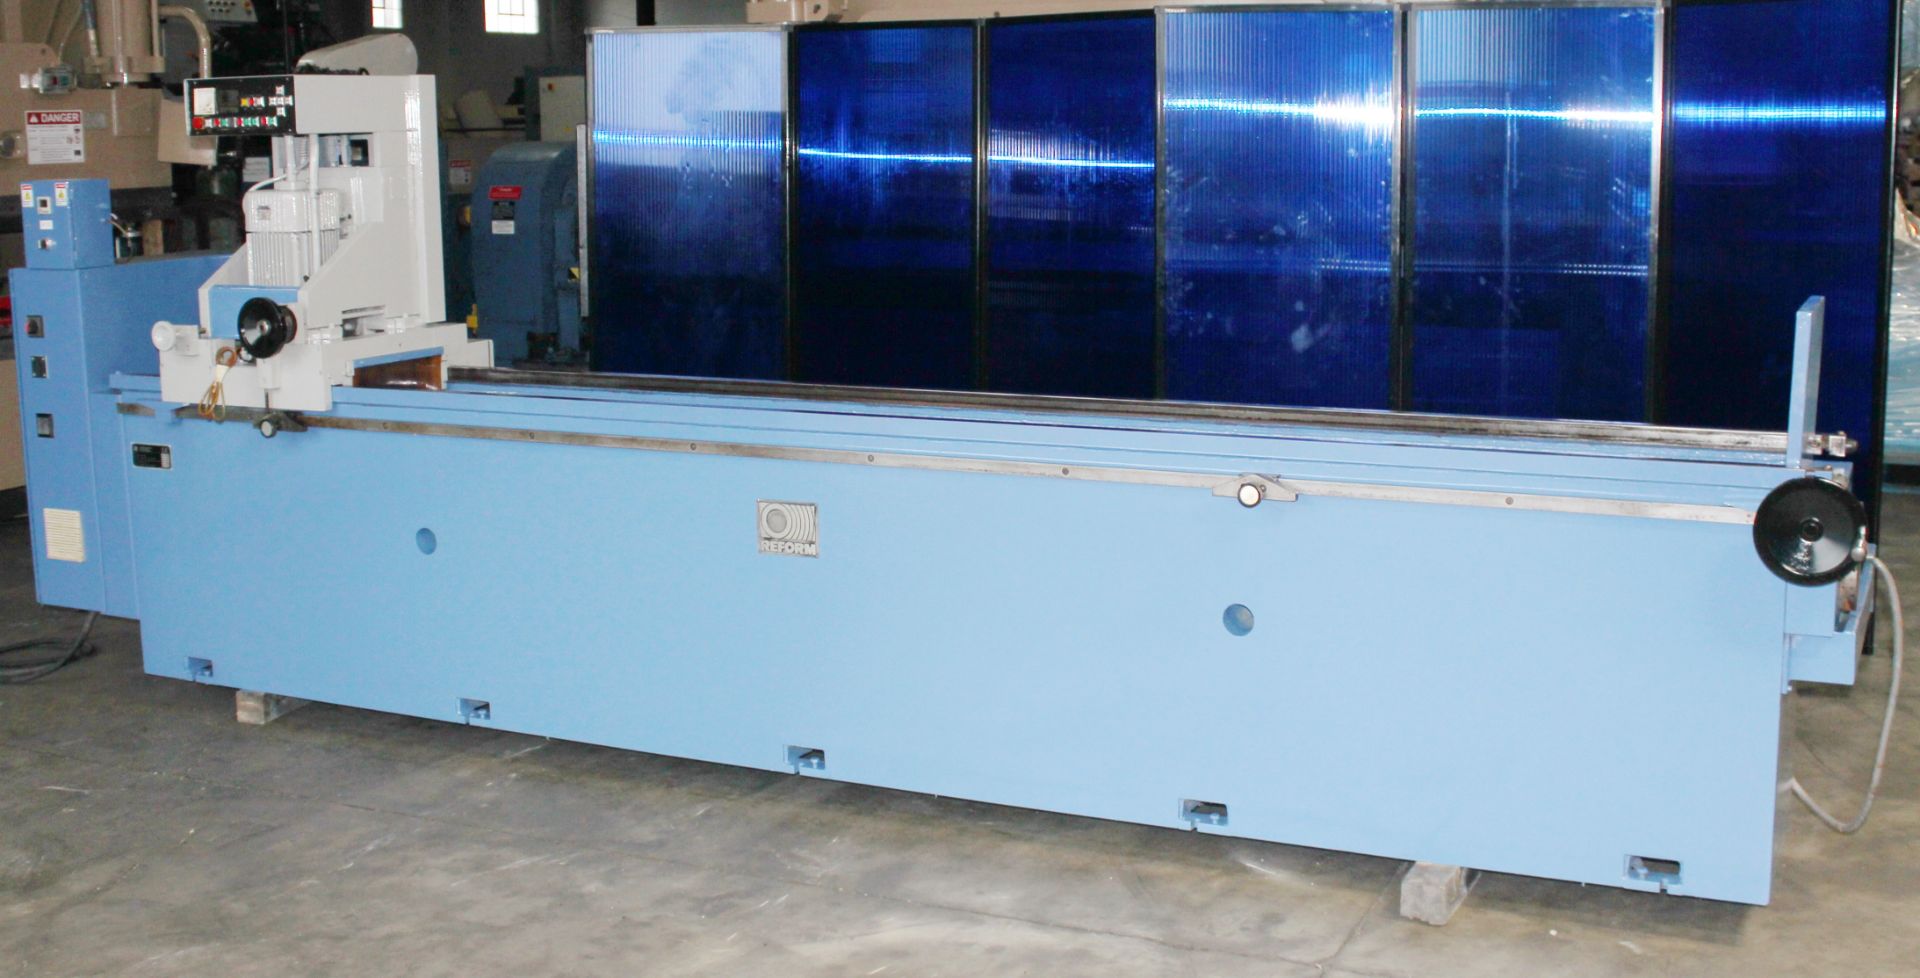 2001 Reform Automatic Heavy Duty Knife Grinder |  6" x 122" , Mdl: AR 31 Type 51, S/N: 7051, Located